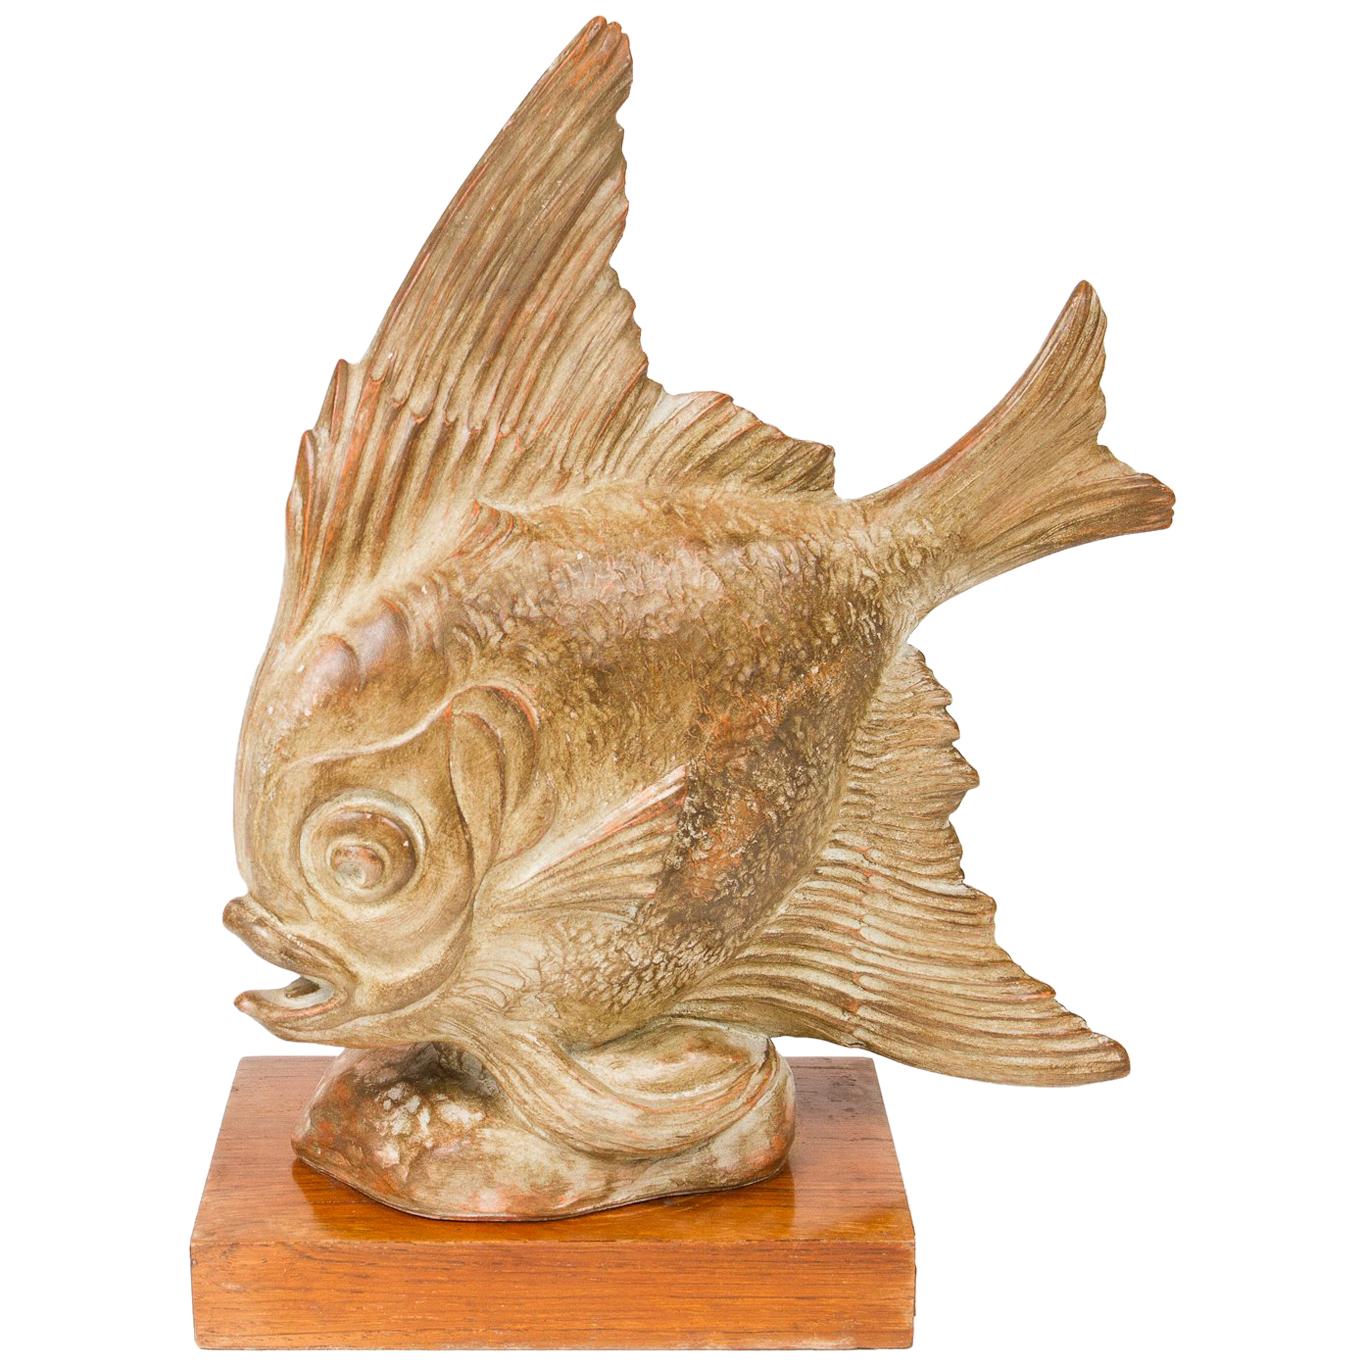 Terracotta Art Deco Figurine of a Fish by R. Rodes